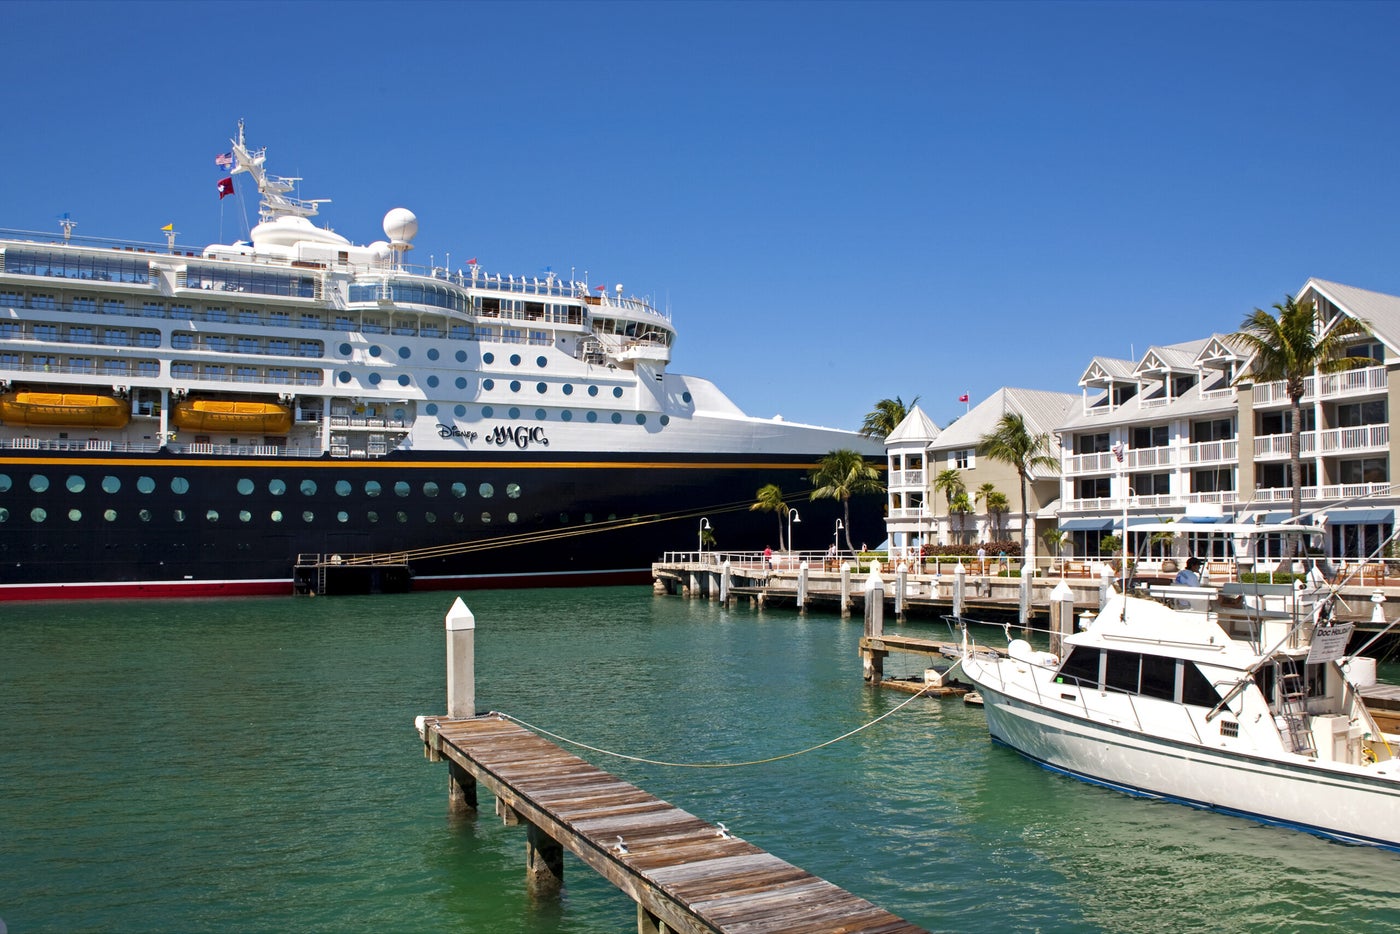 Key West voters deliver a blow to cruise lines with bigship ban